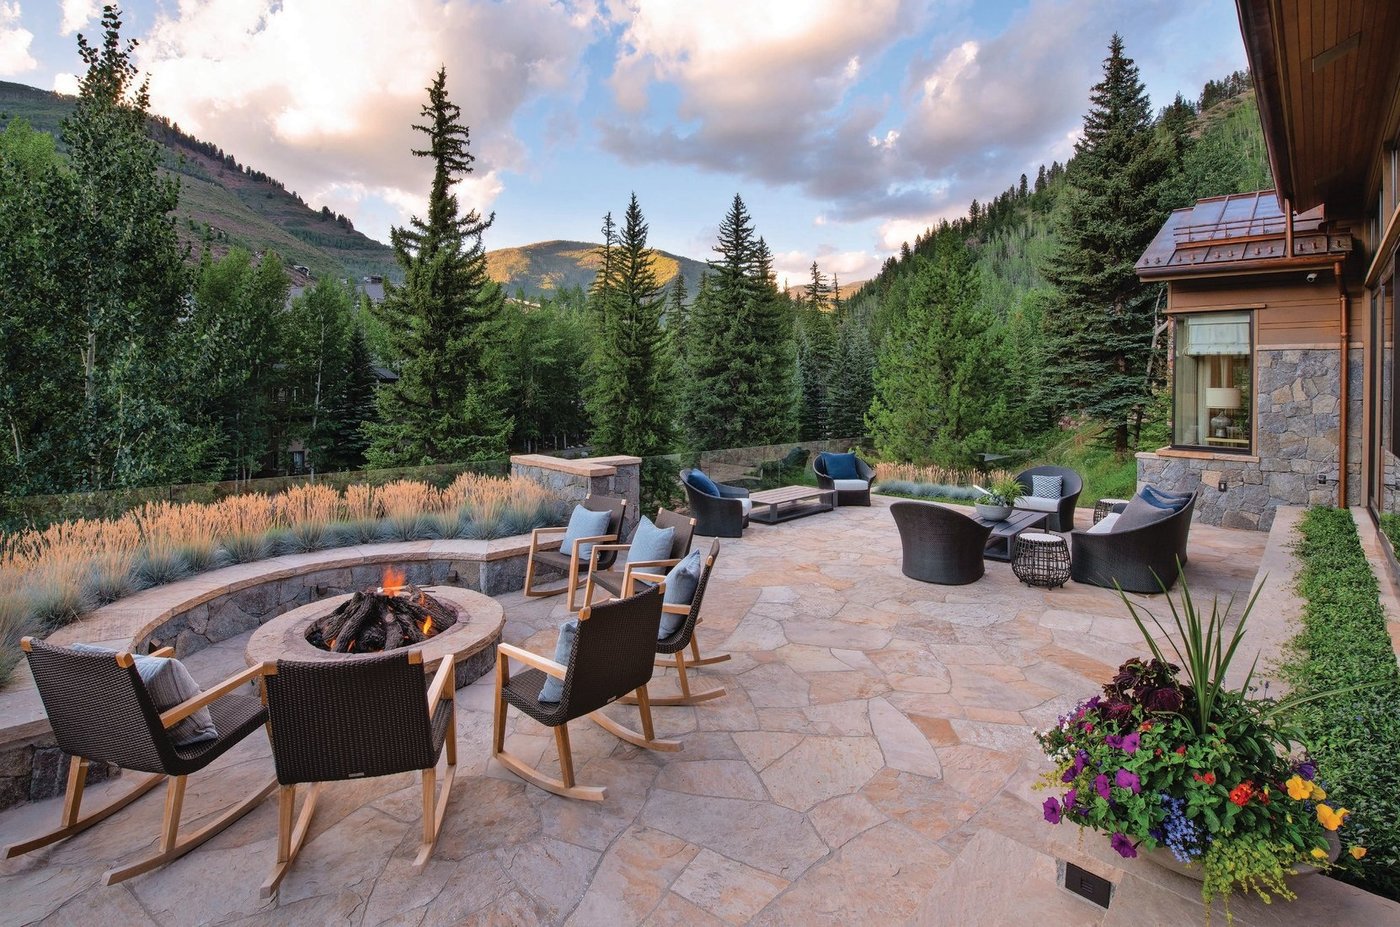 Mountain views are only one of the amazing offerings at this home. PHOTO COURTESY OF THE DOVE AGENCY